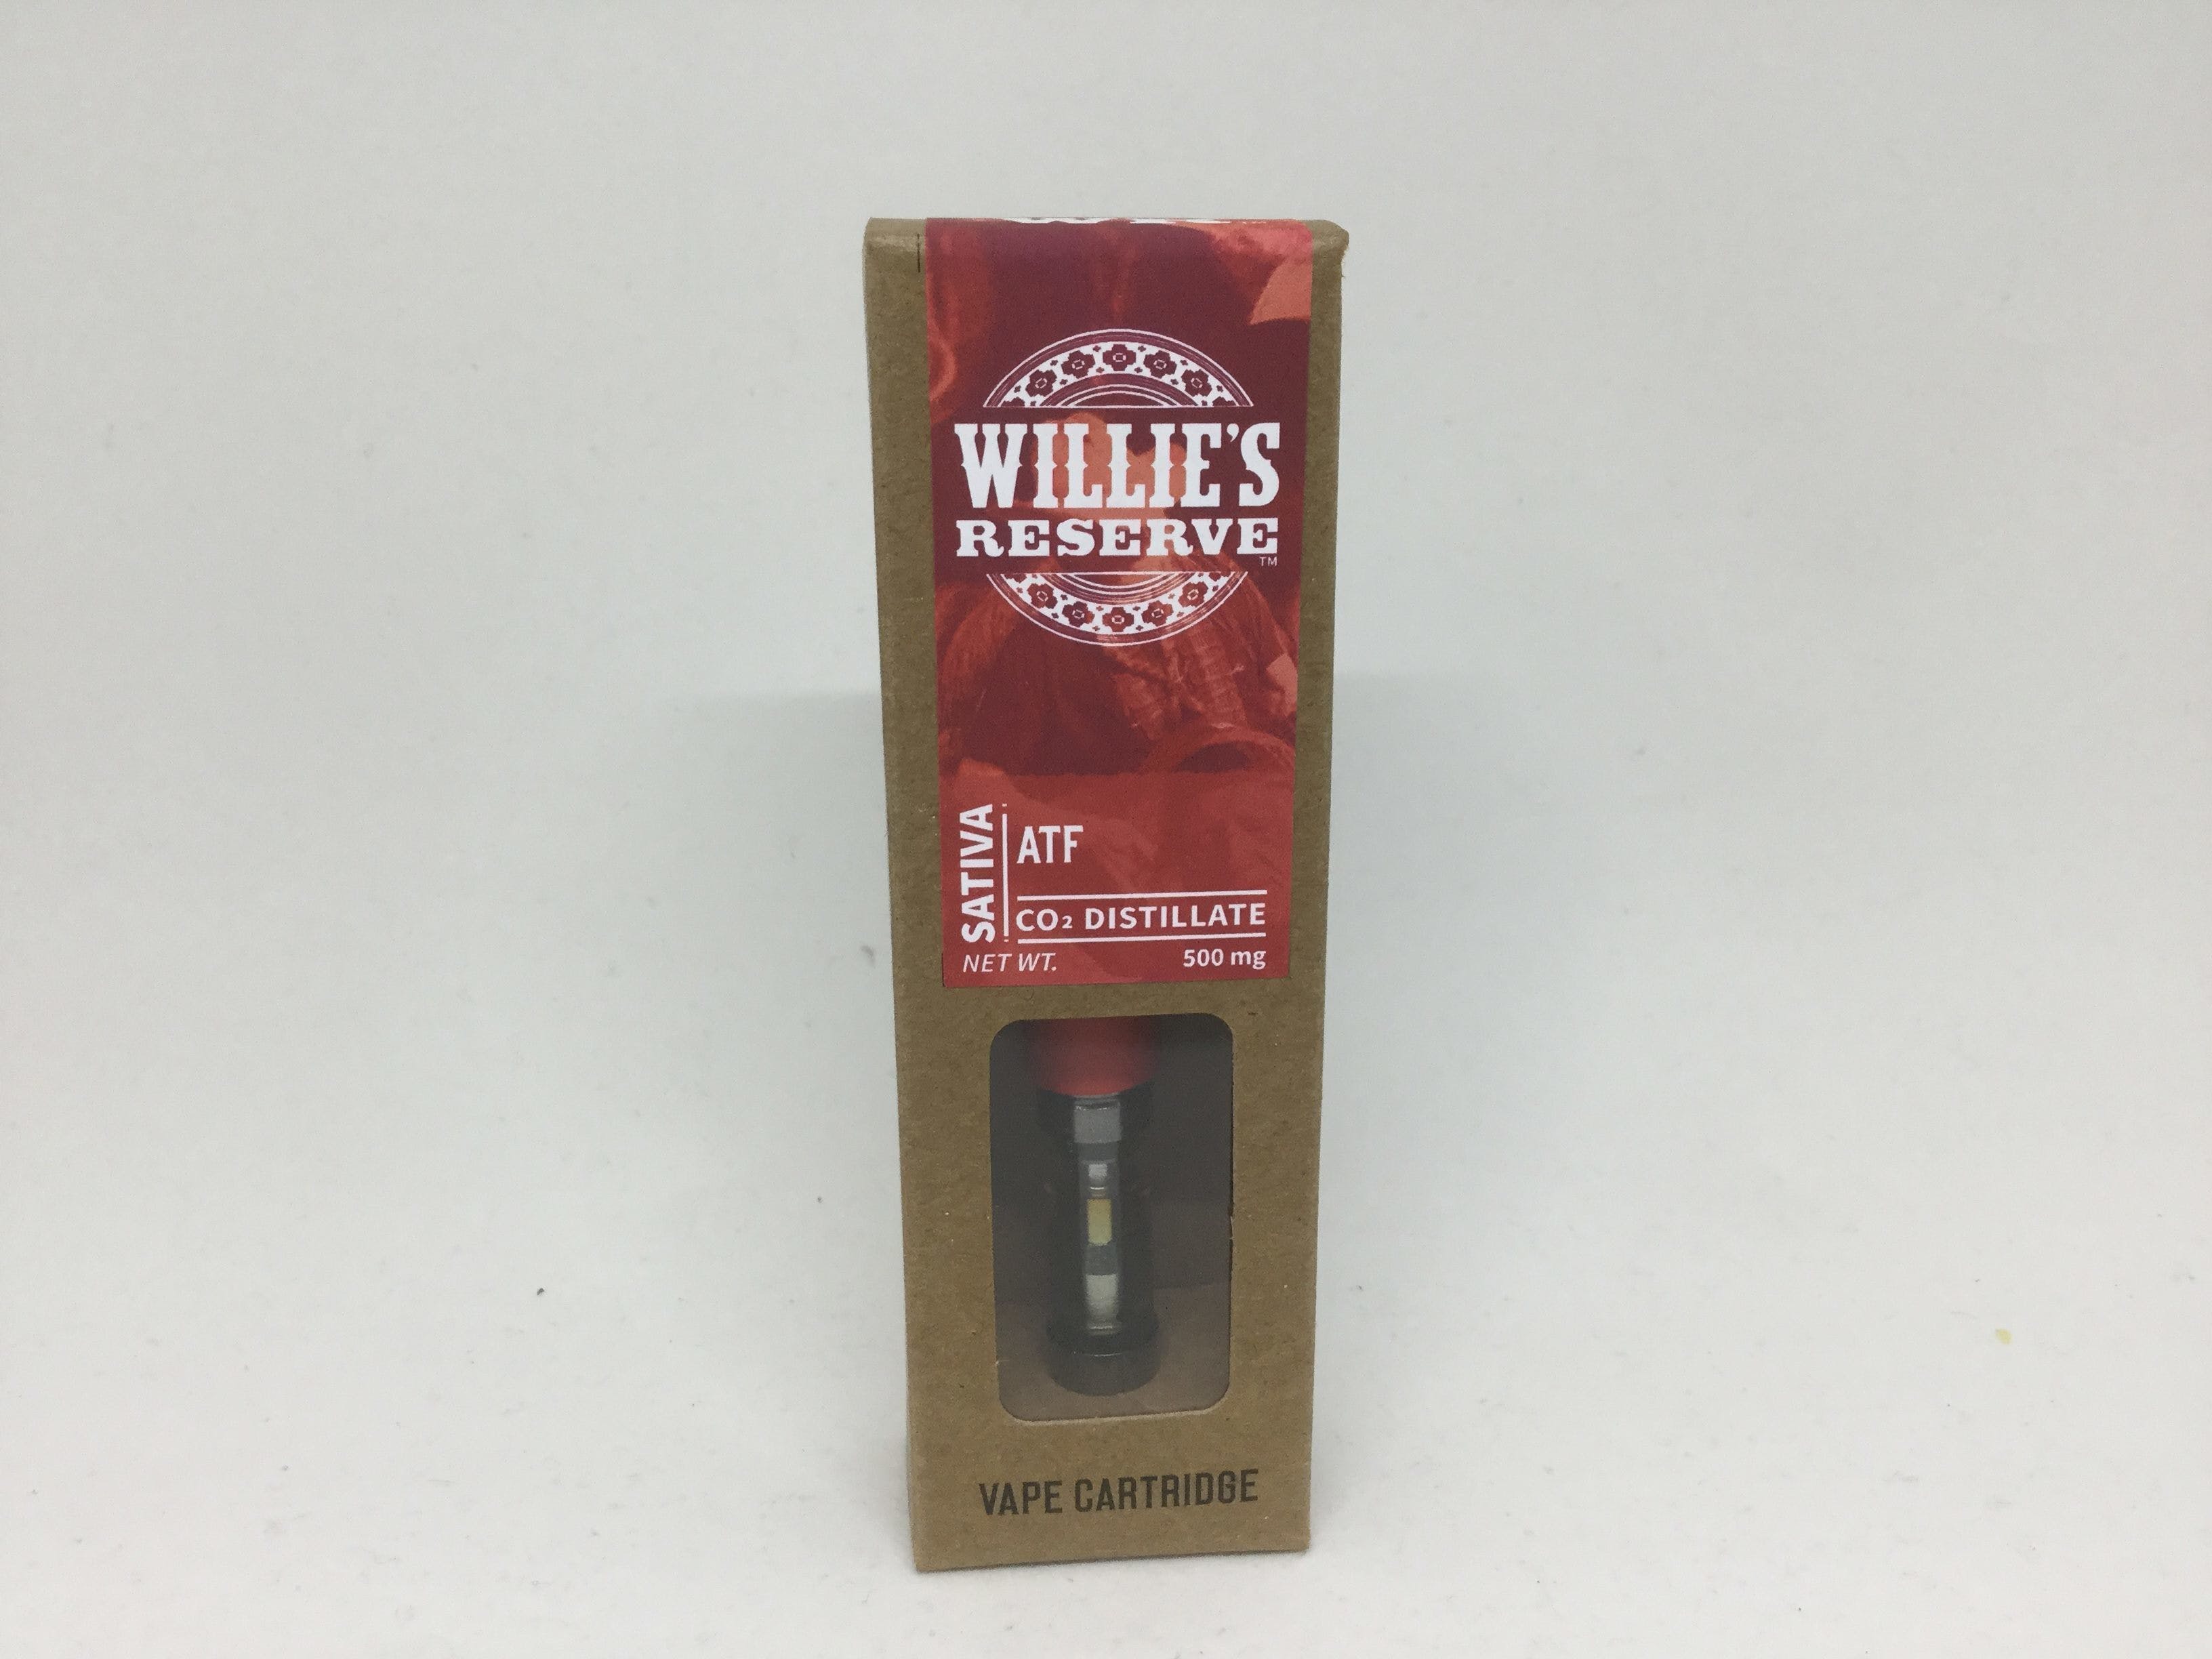 concentrate-willies-reserve-atf-cartridge